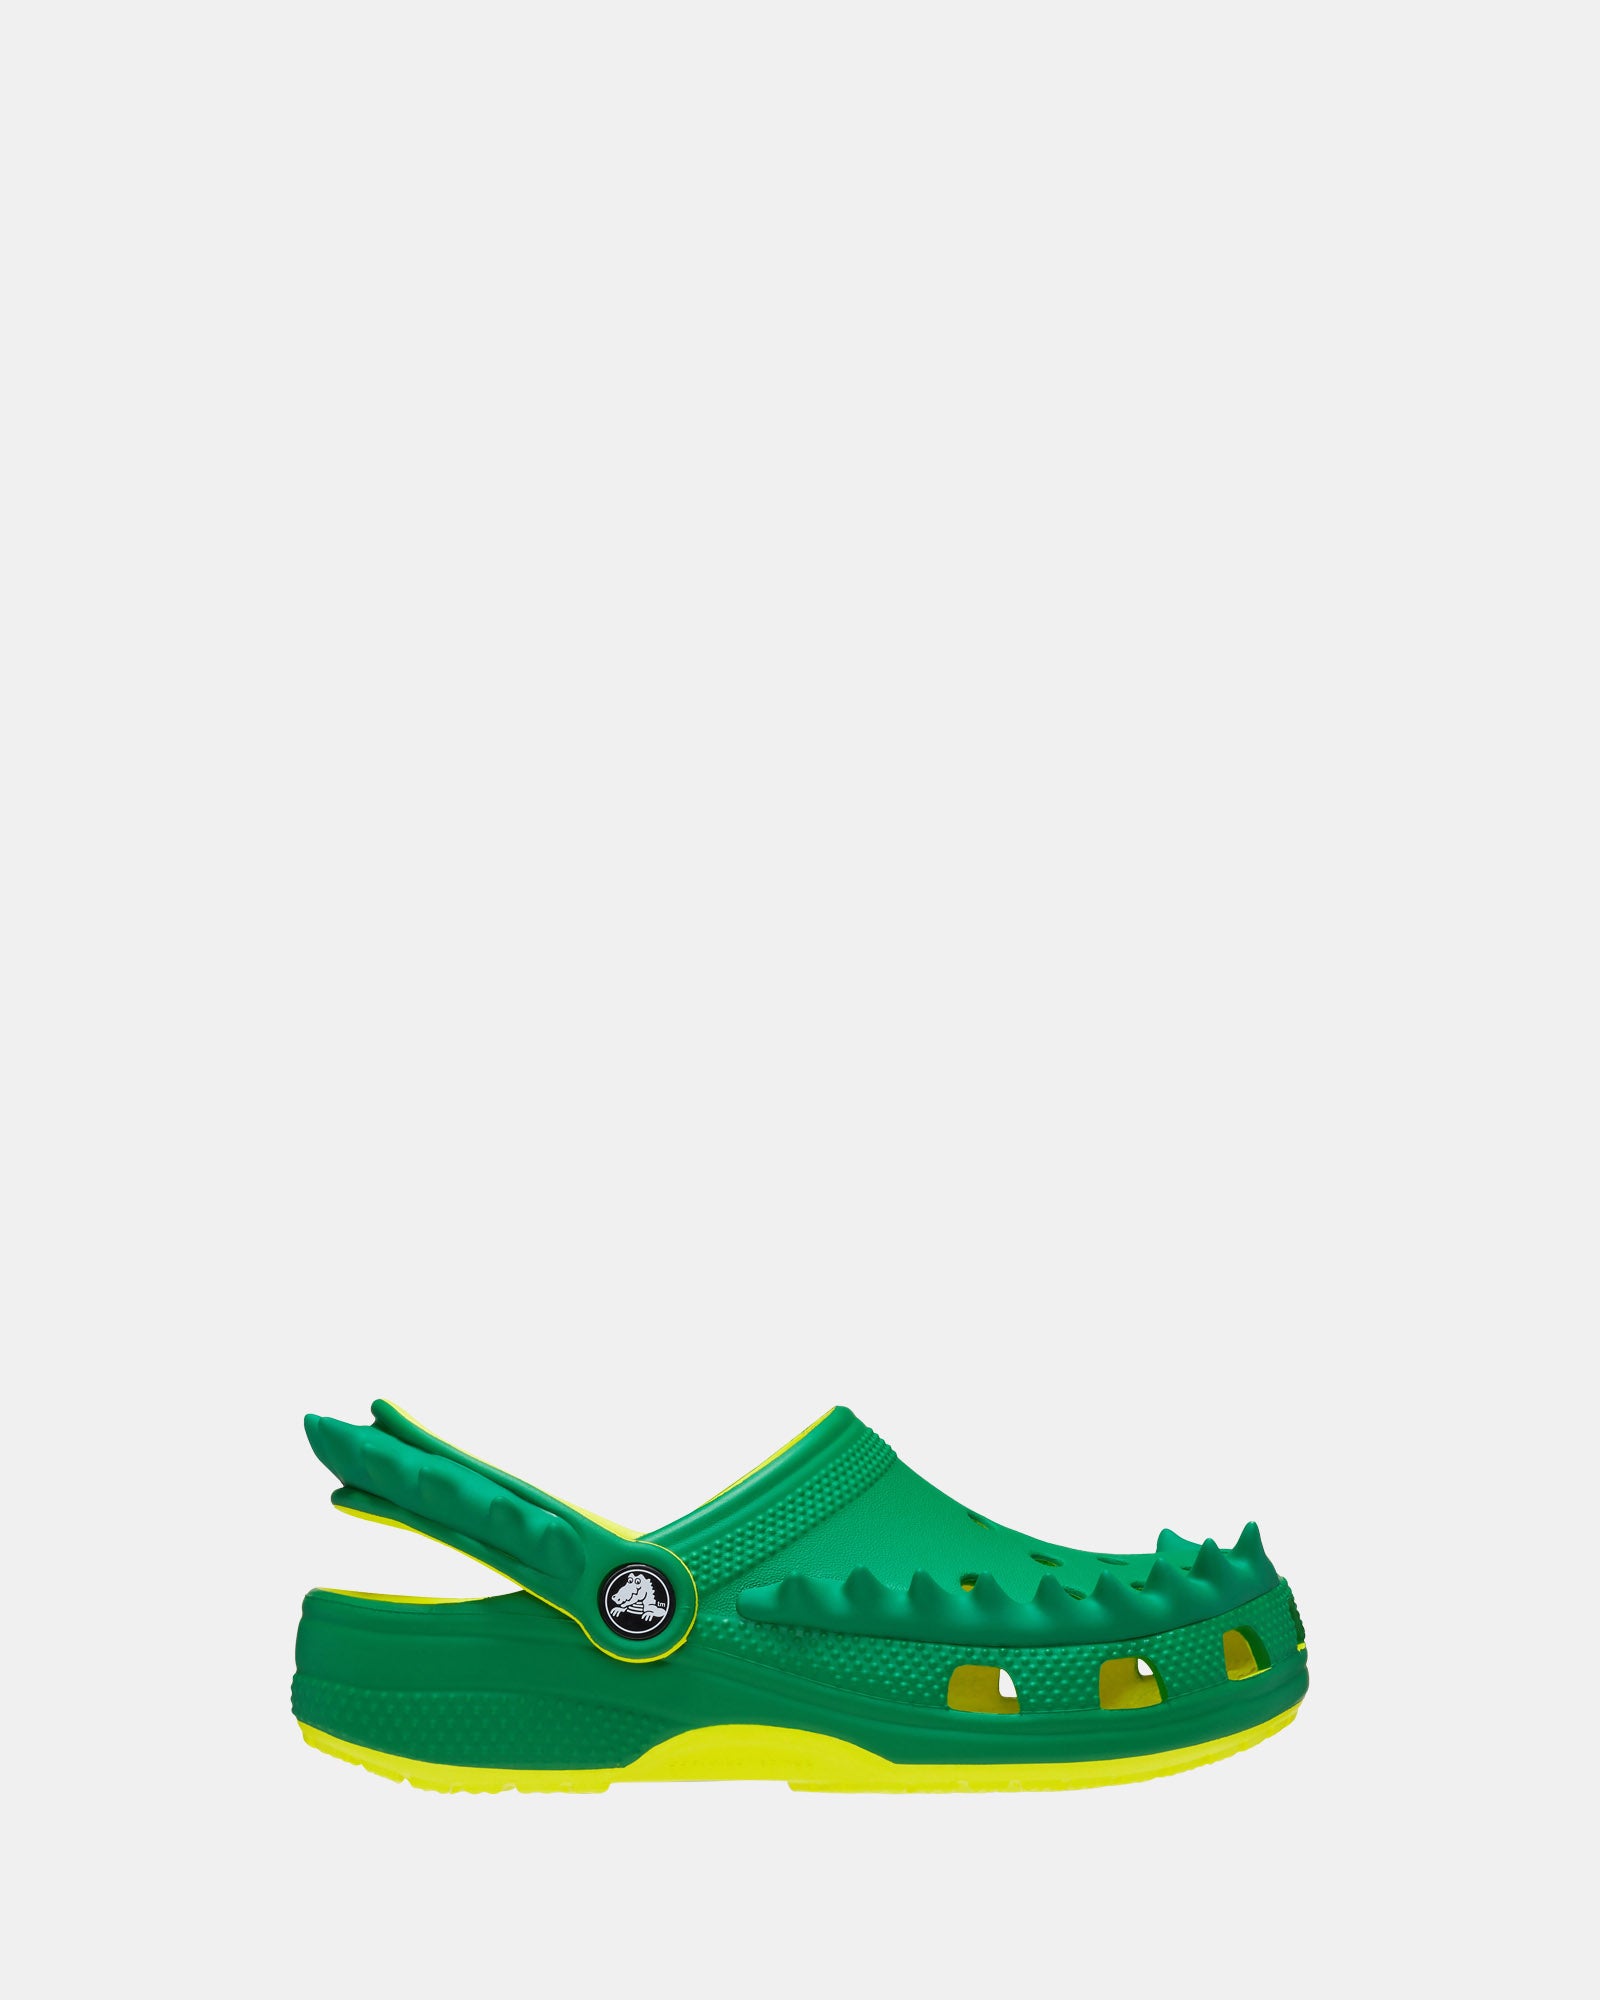 Classic Clog Fun Lab Spikes Infant Acidity/Green